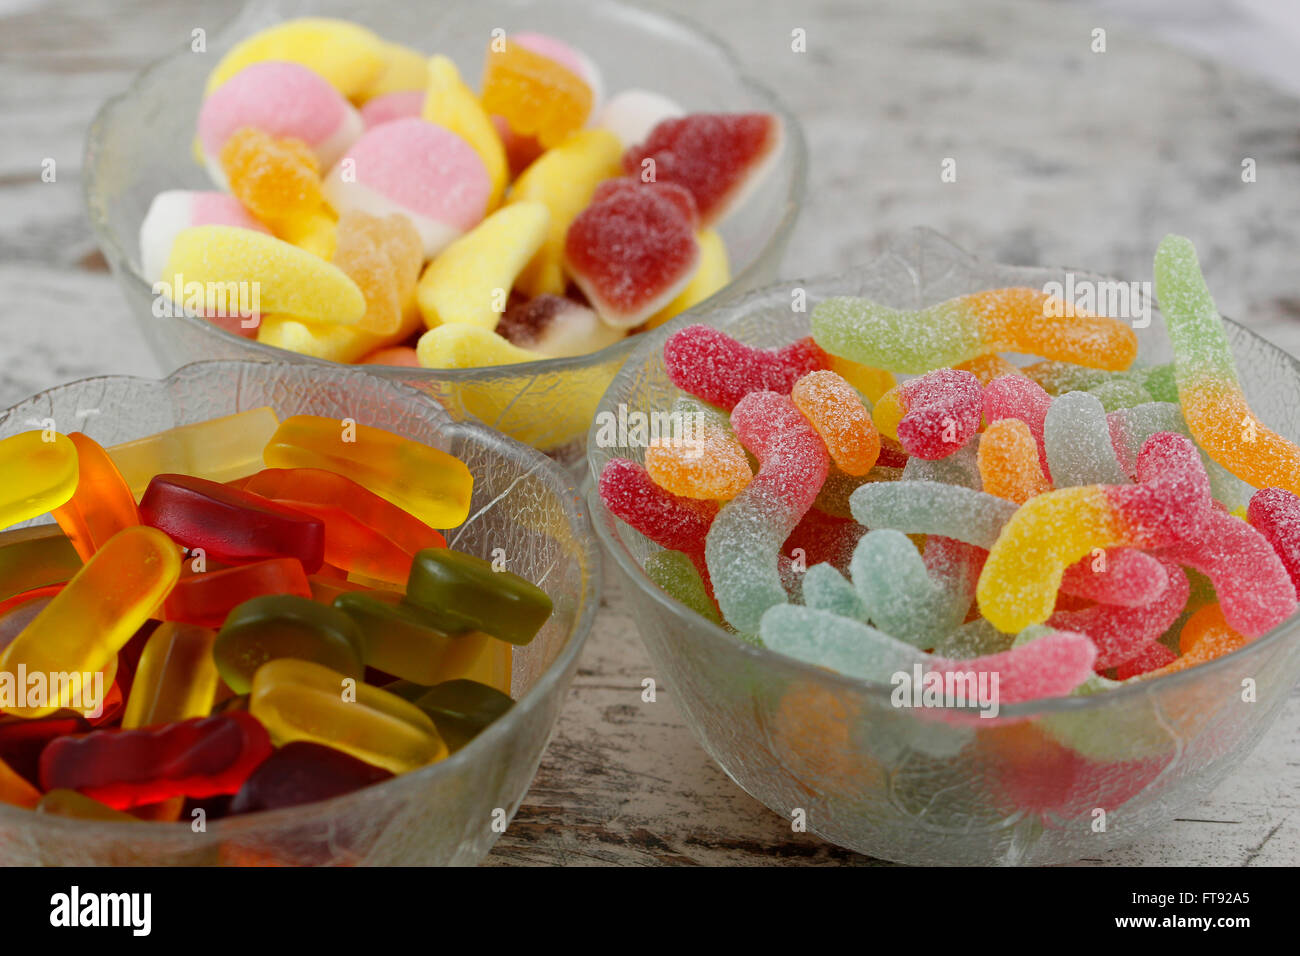 Sweet candies in a glass bowl Stock Photo